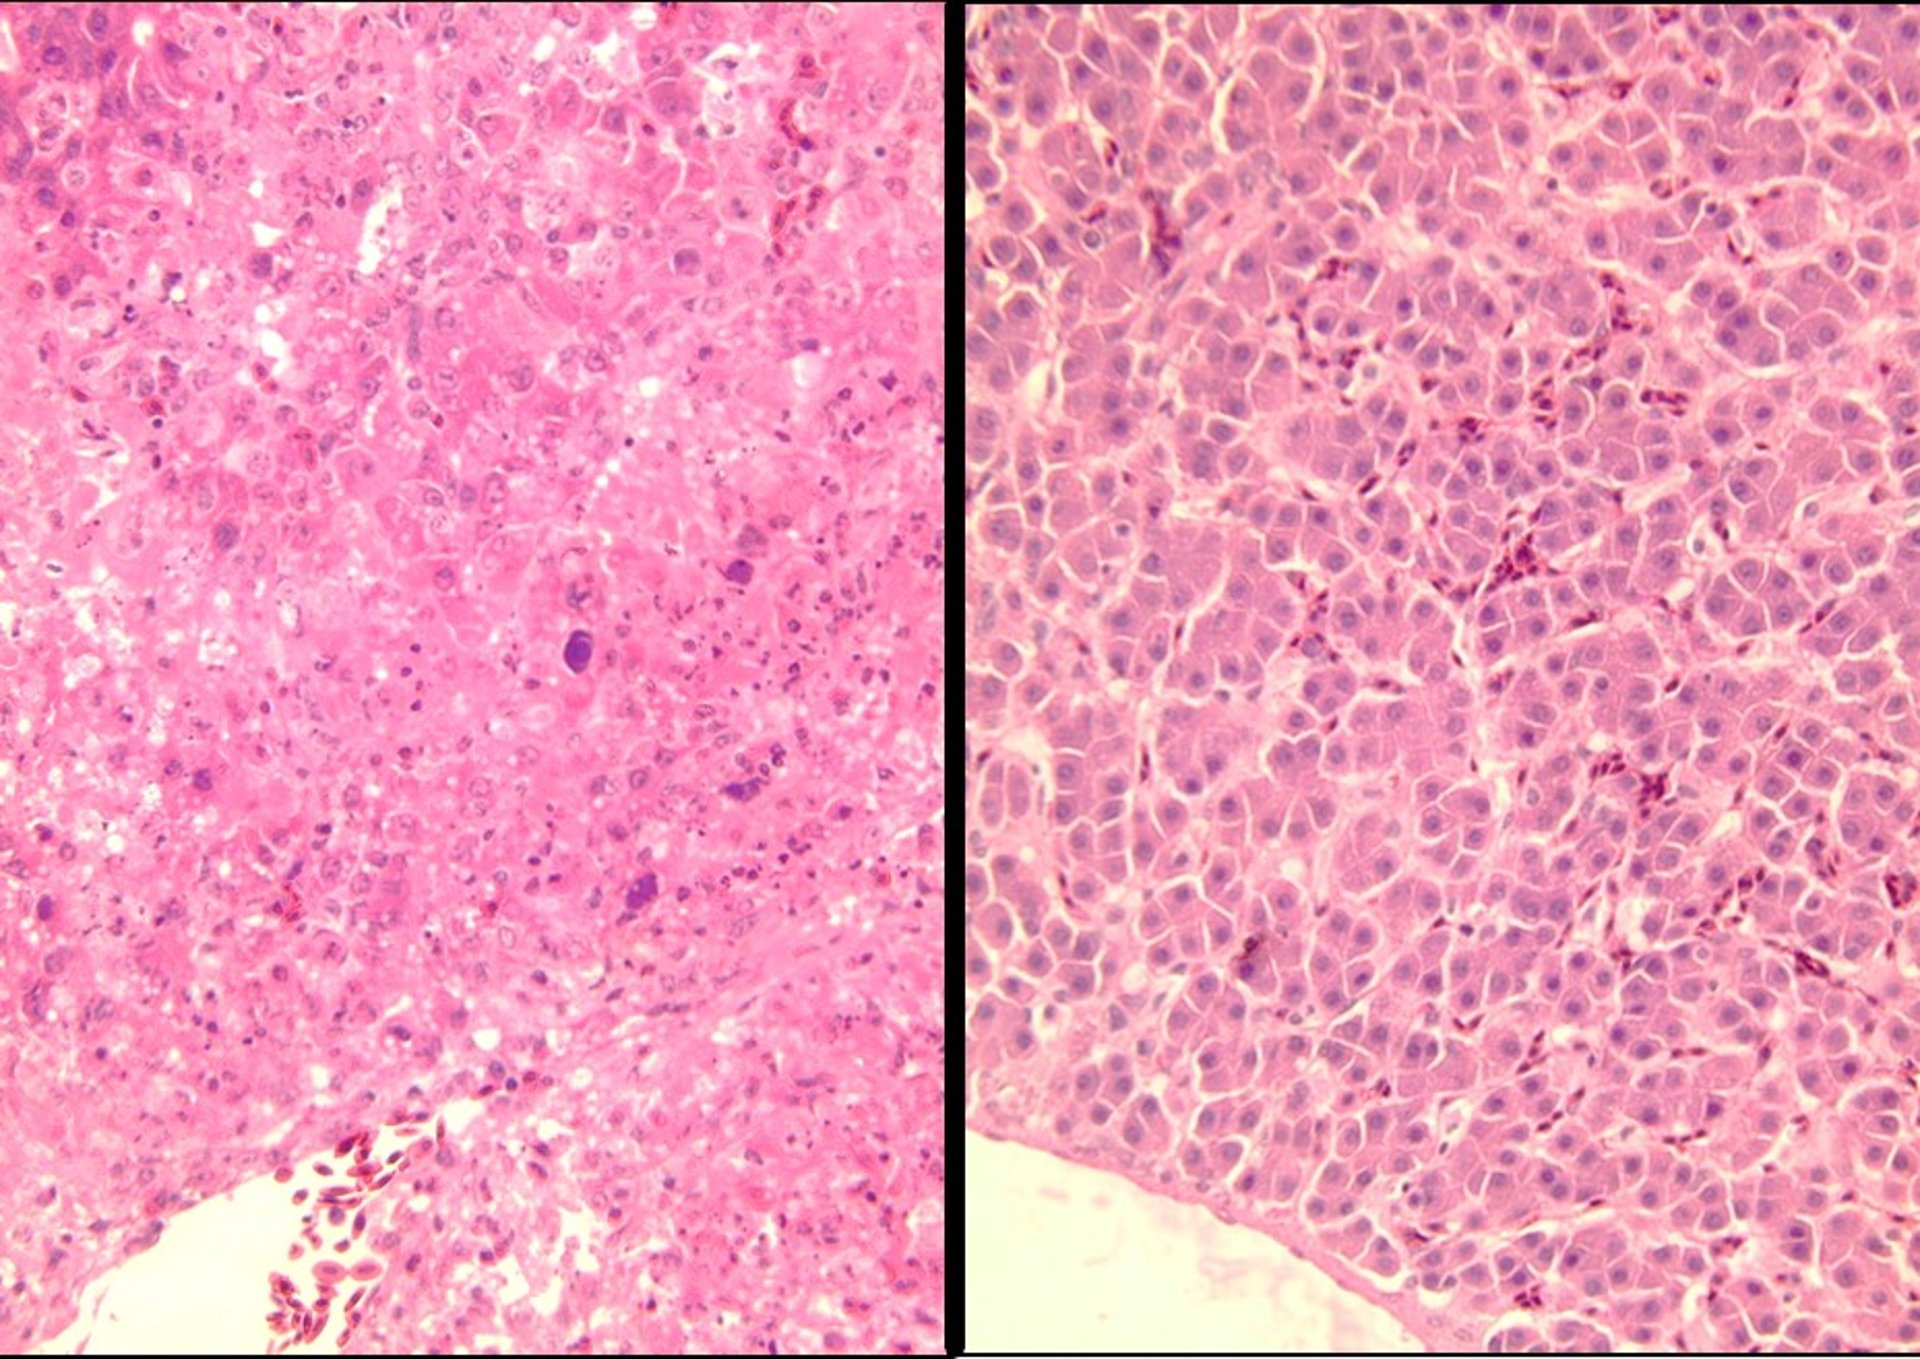 Microscopic hepatic lesions, IBH and HHS